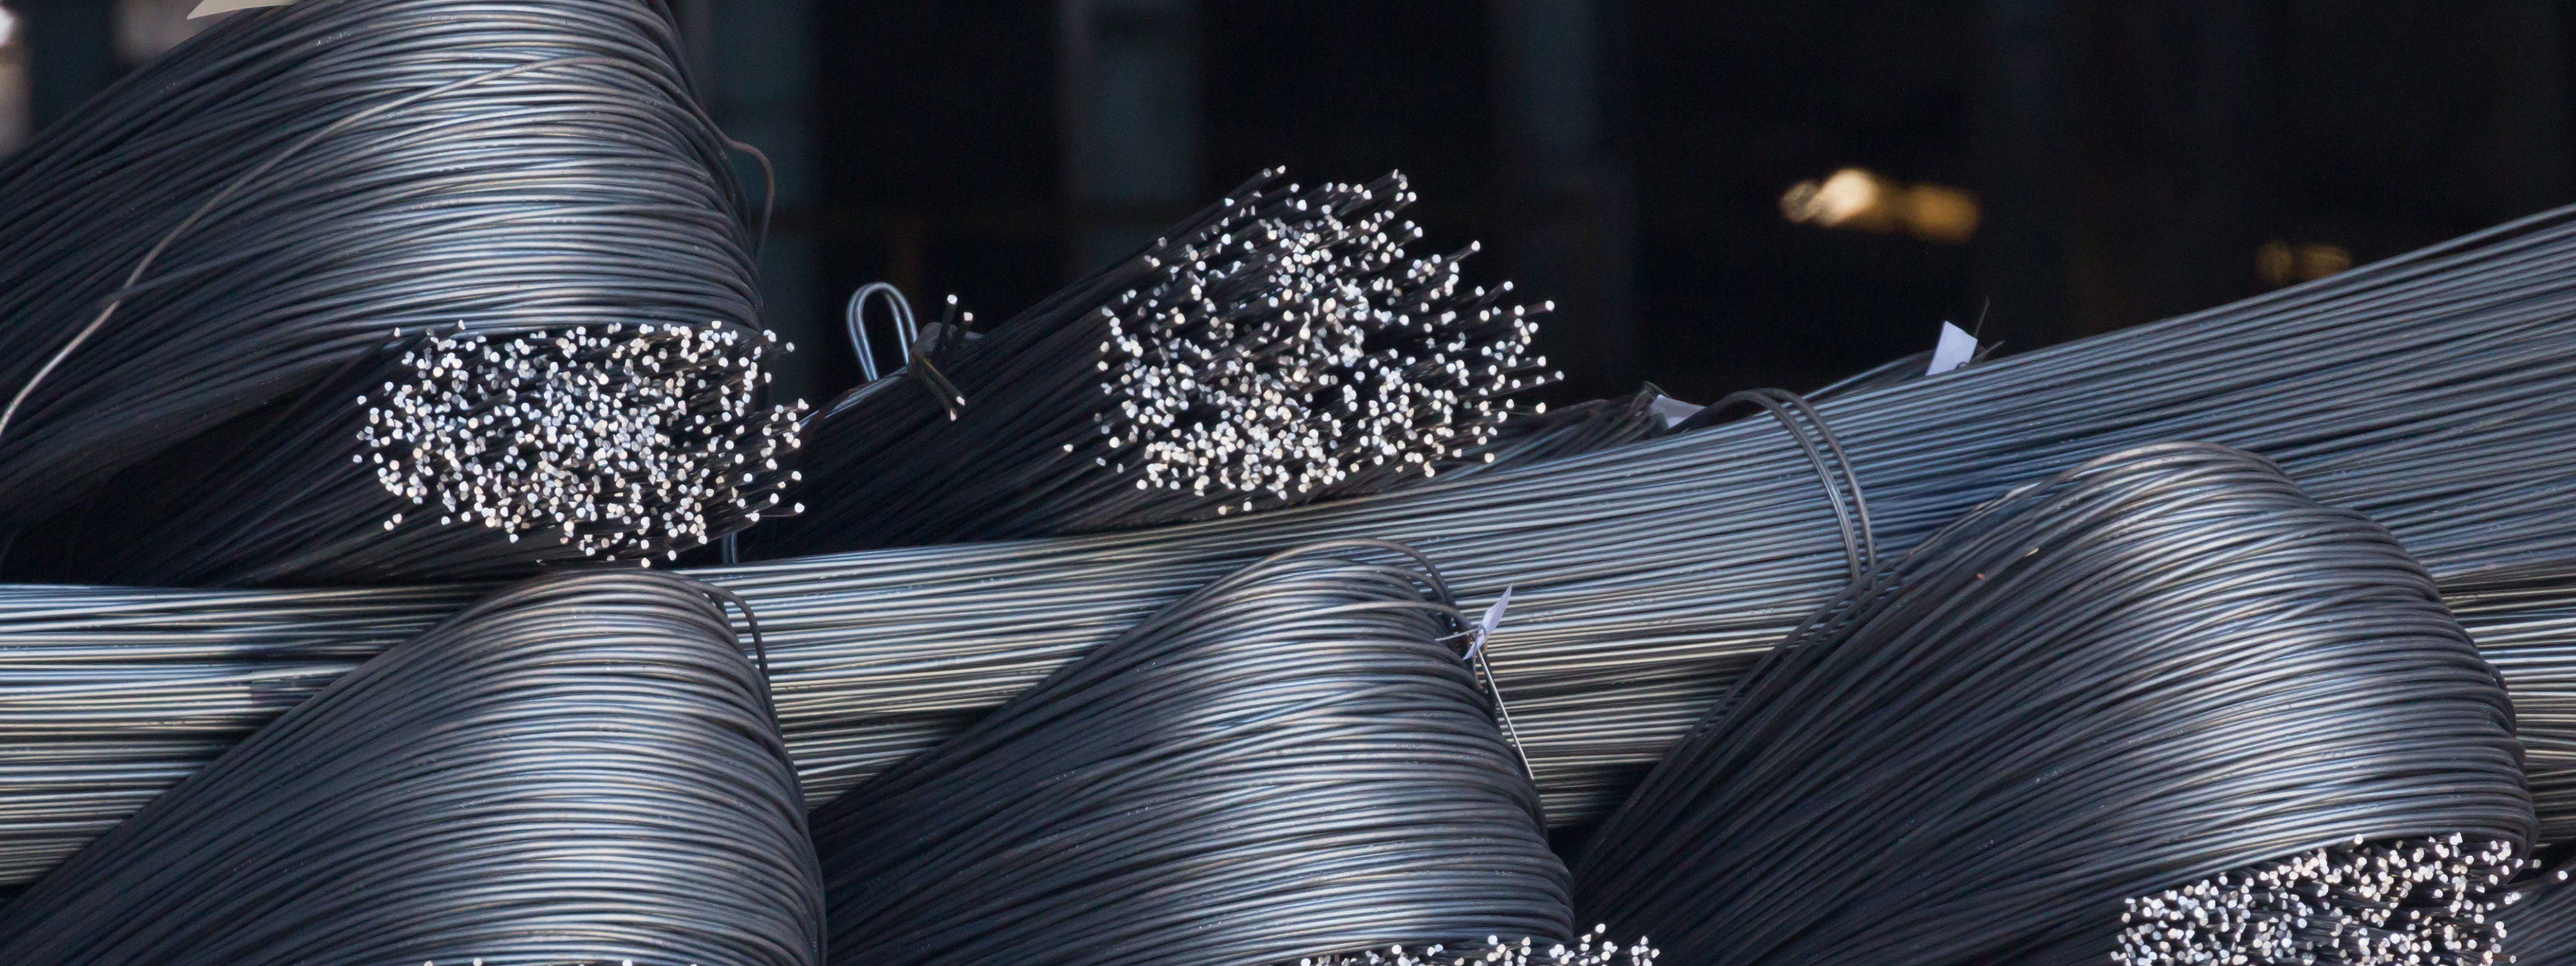 Pile iron metal wire rod